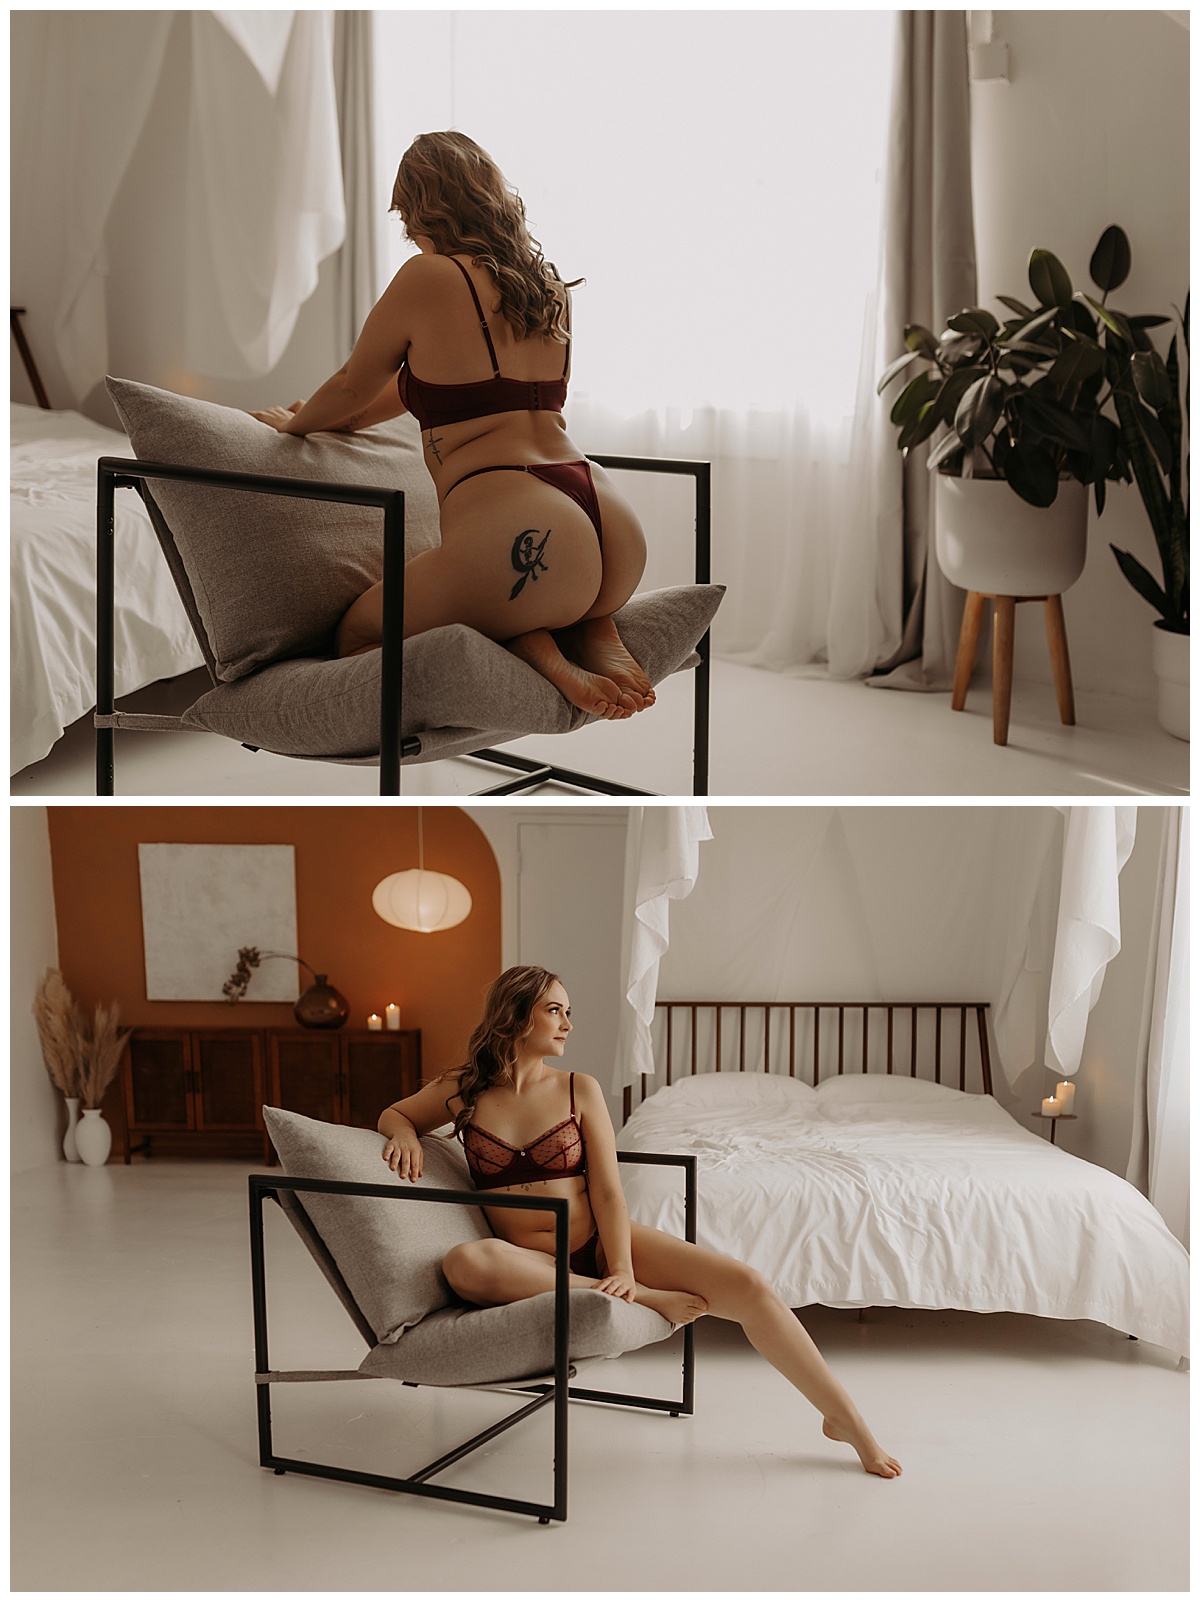 Woman sits on a chair wearing lingerie for Minneapolis Boudoir Photographer